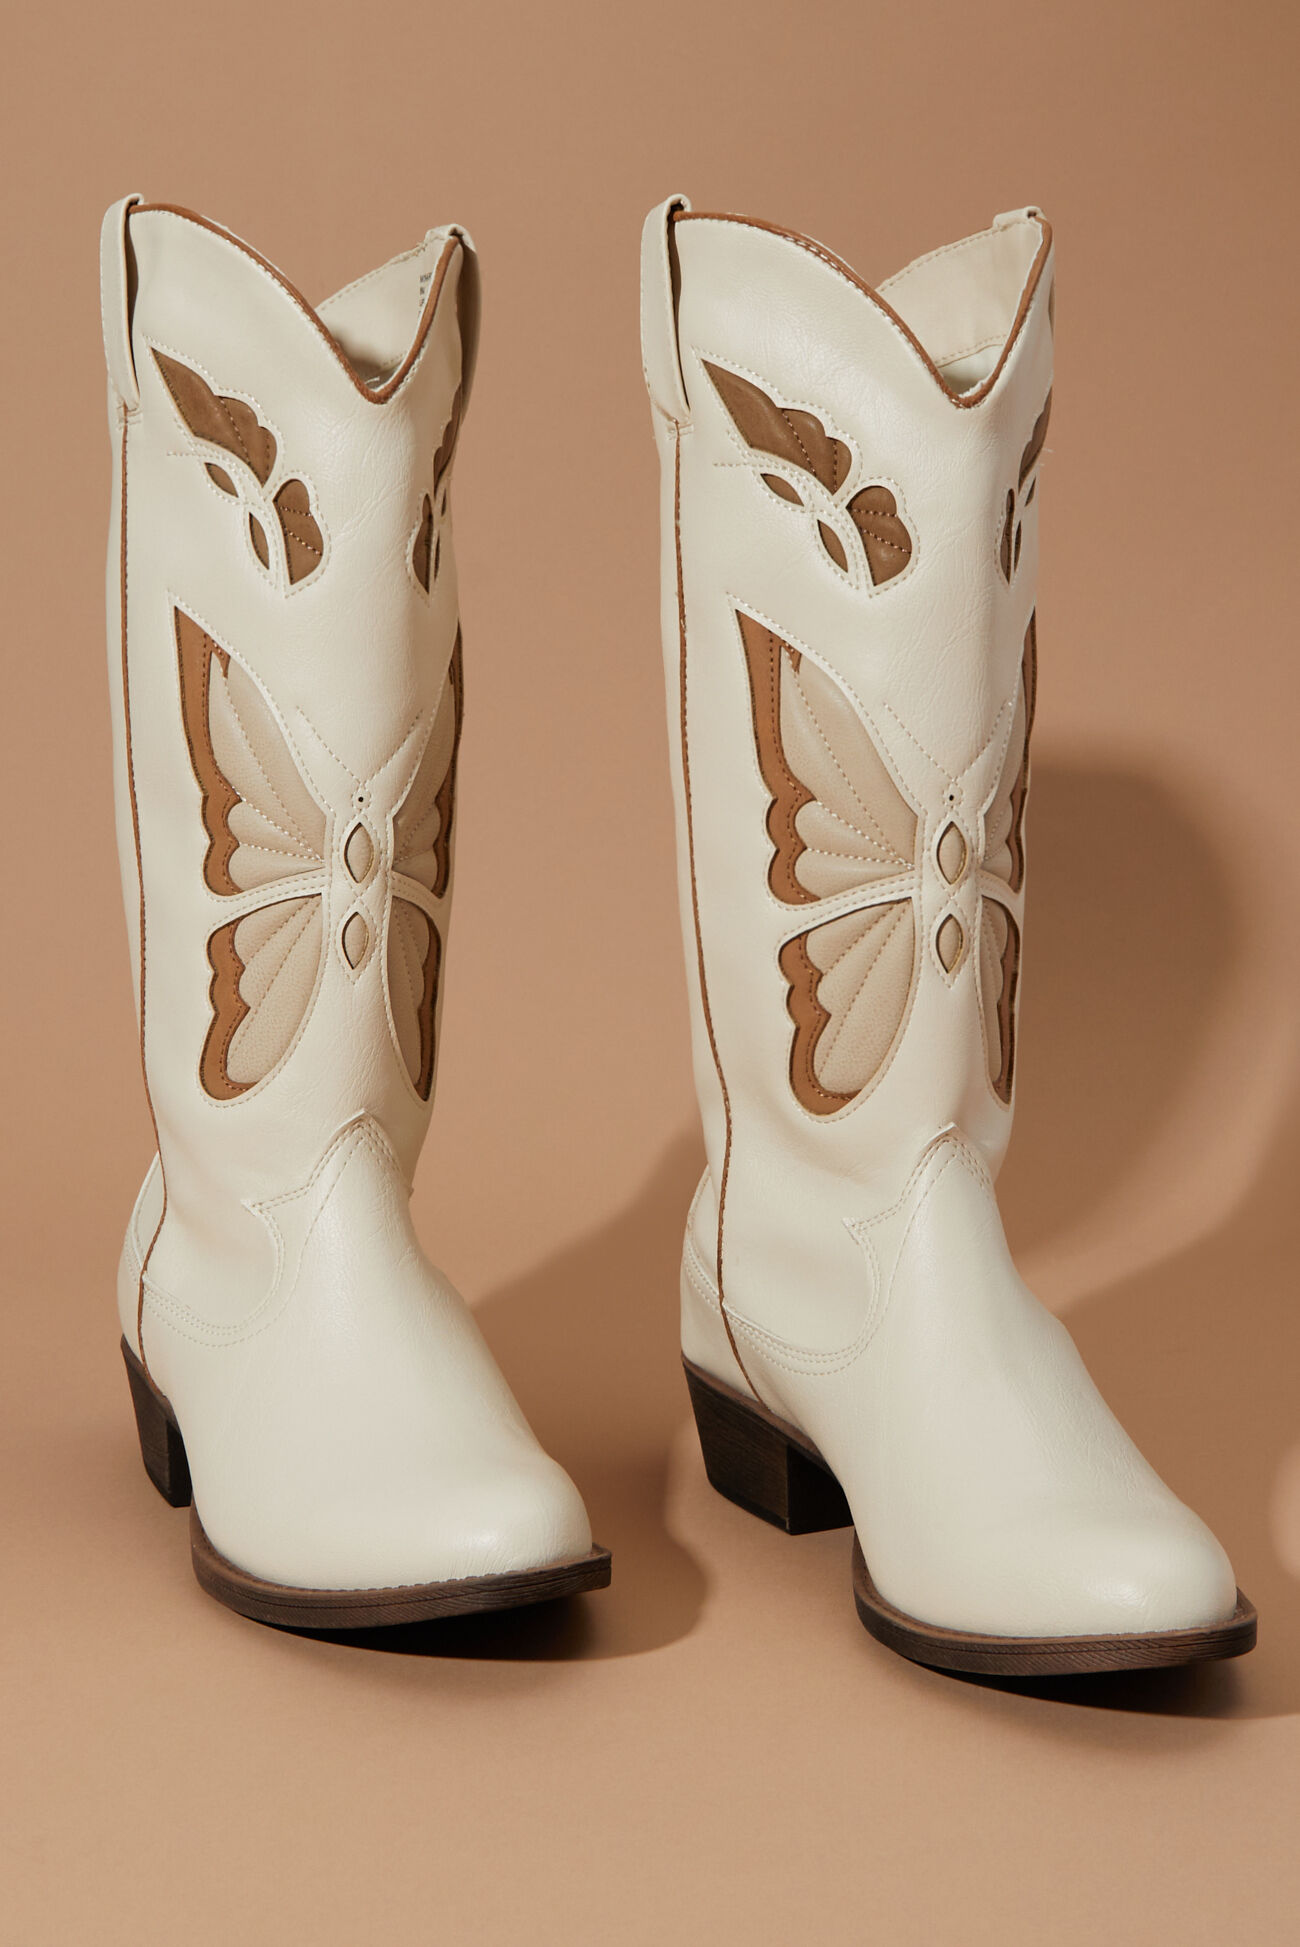 Monarch Butterfly Cut Out Boots